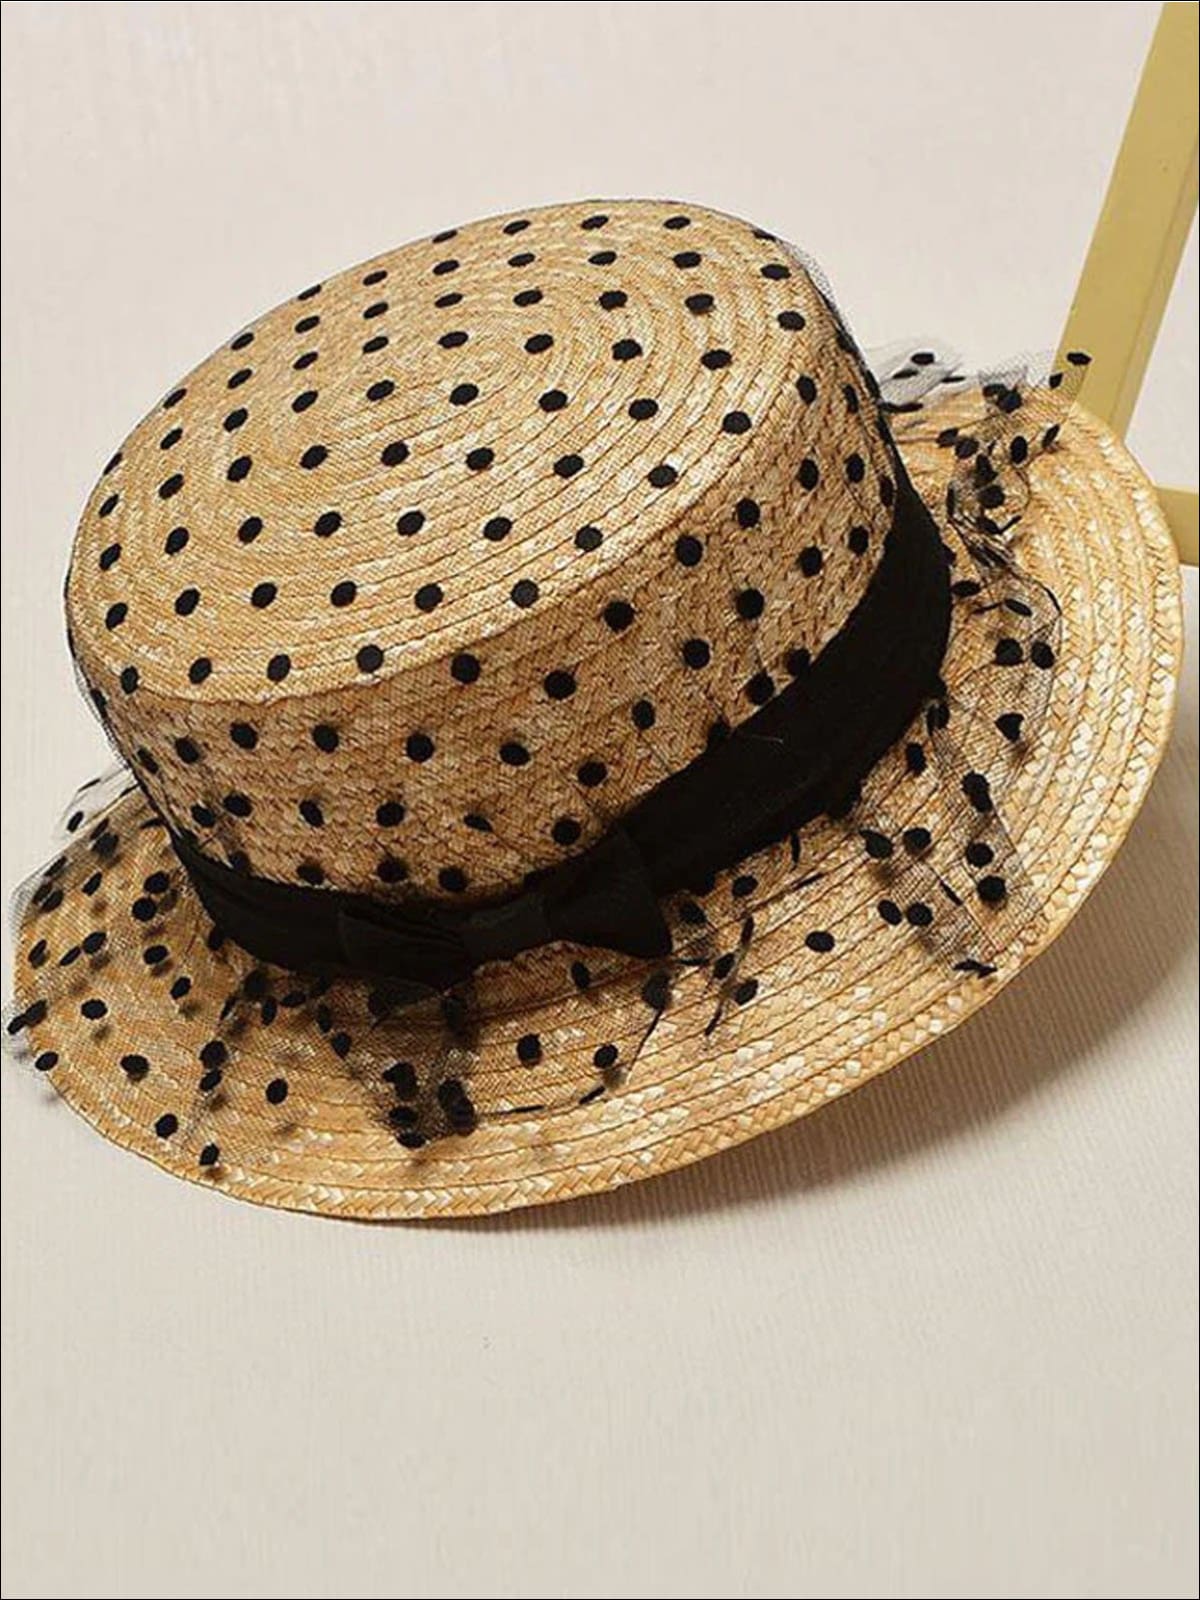 Girls Lace Dotted Mesh Straw Hat - Tan - Girls Hats